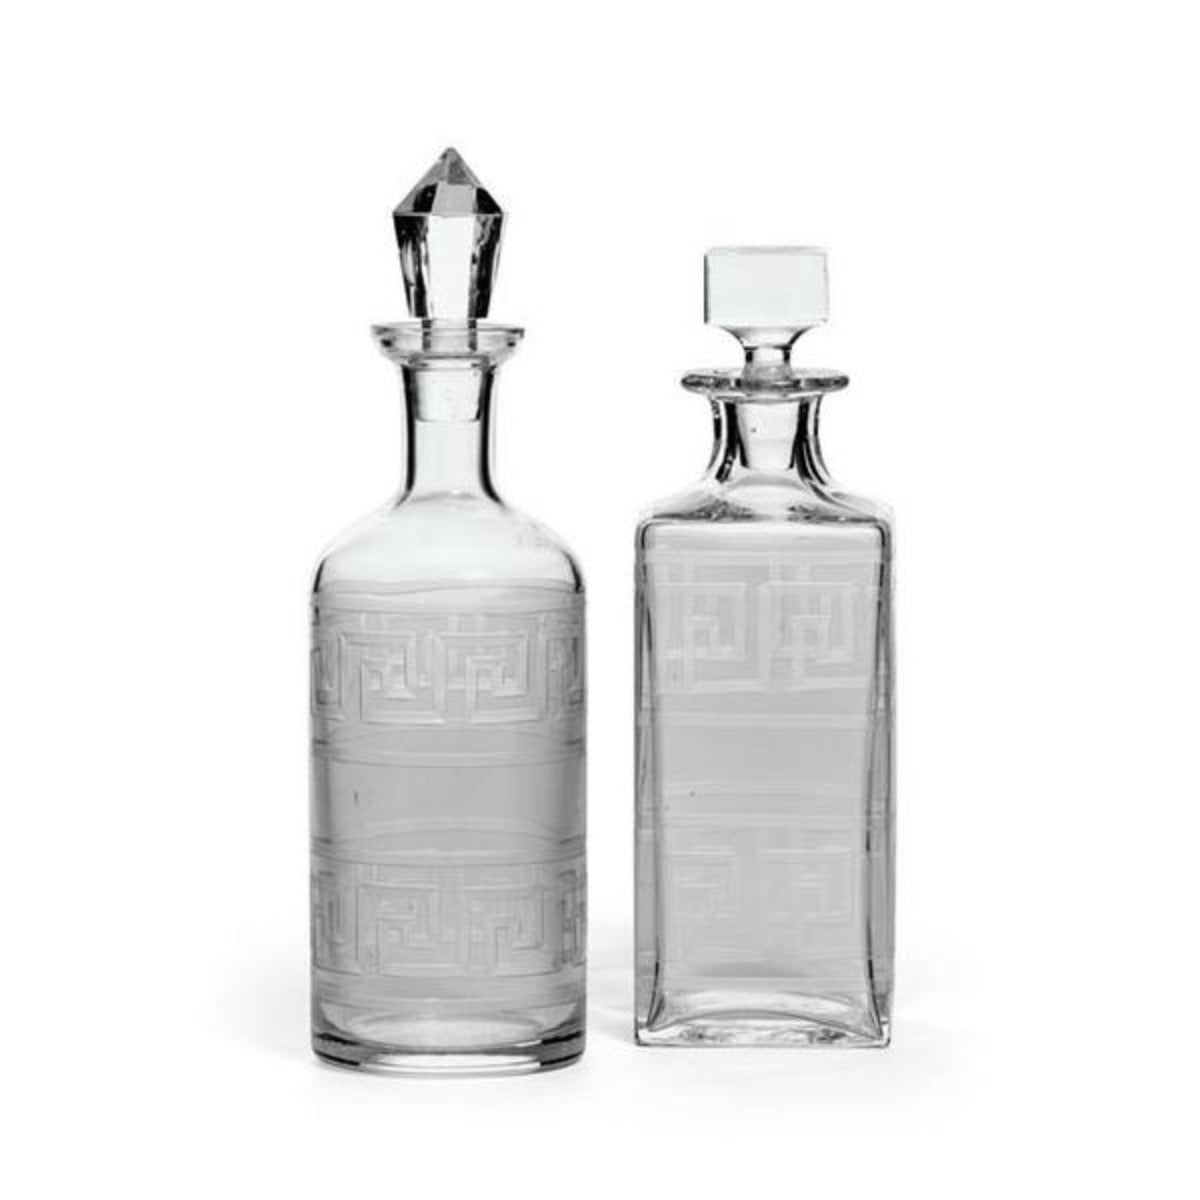 Hand crafted Etched Glass Decanters